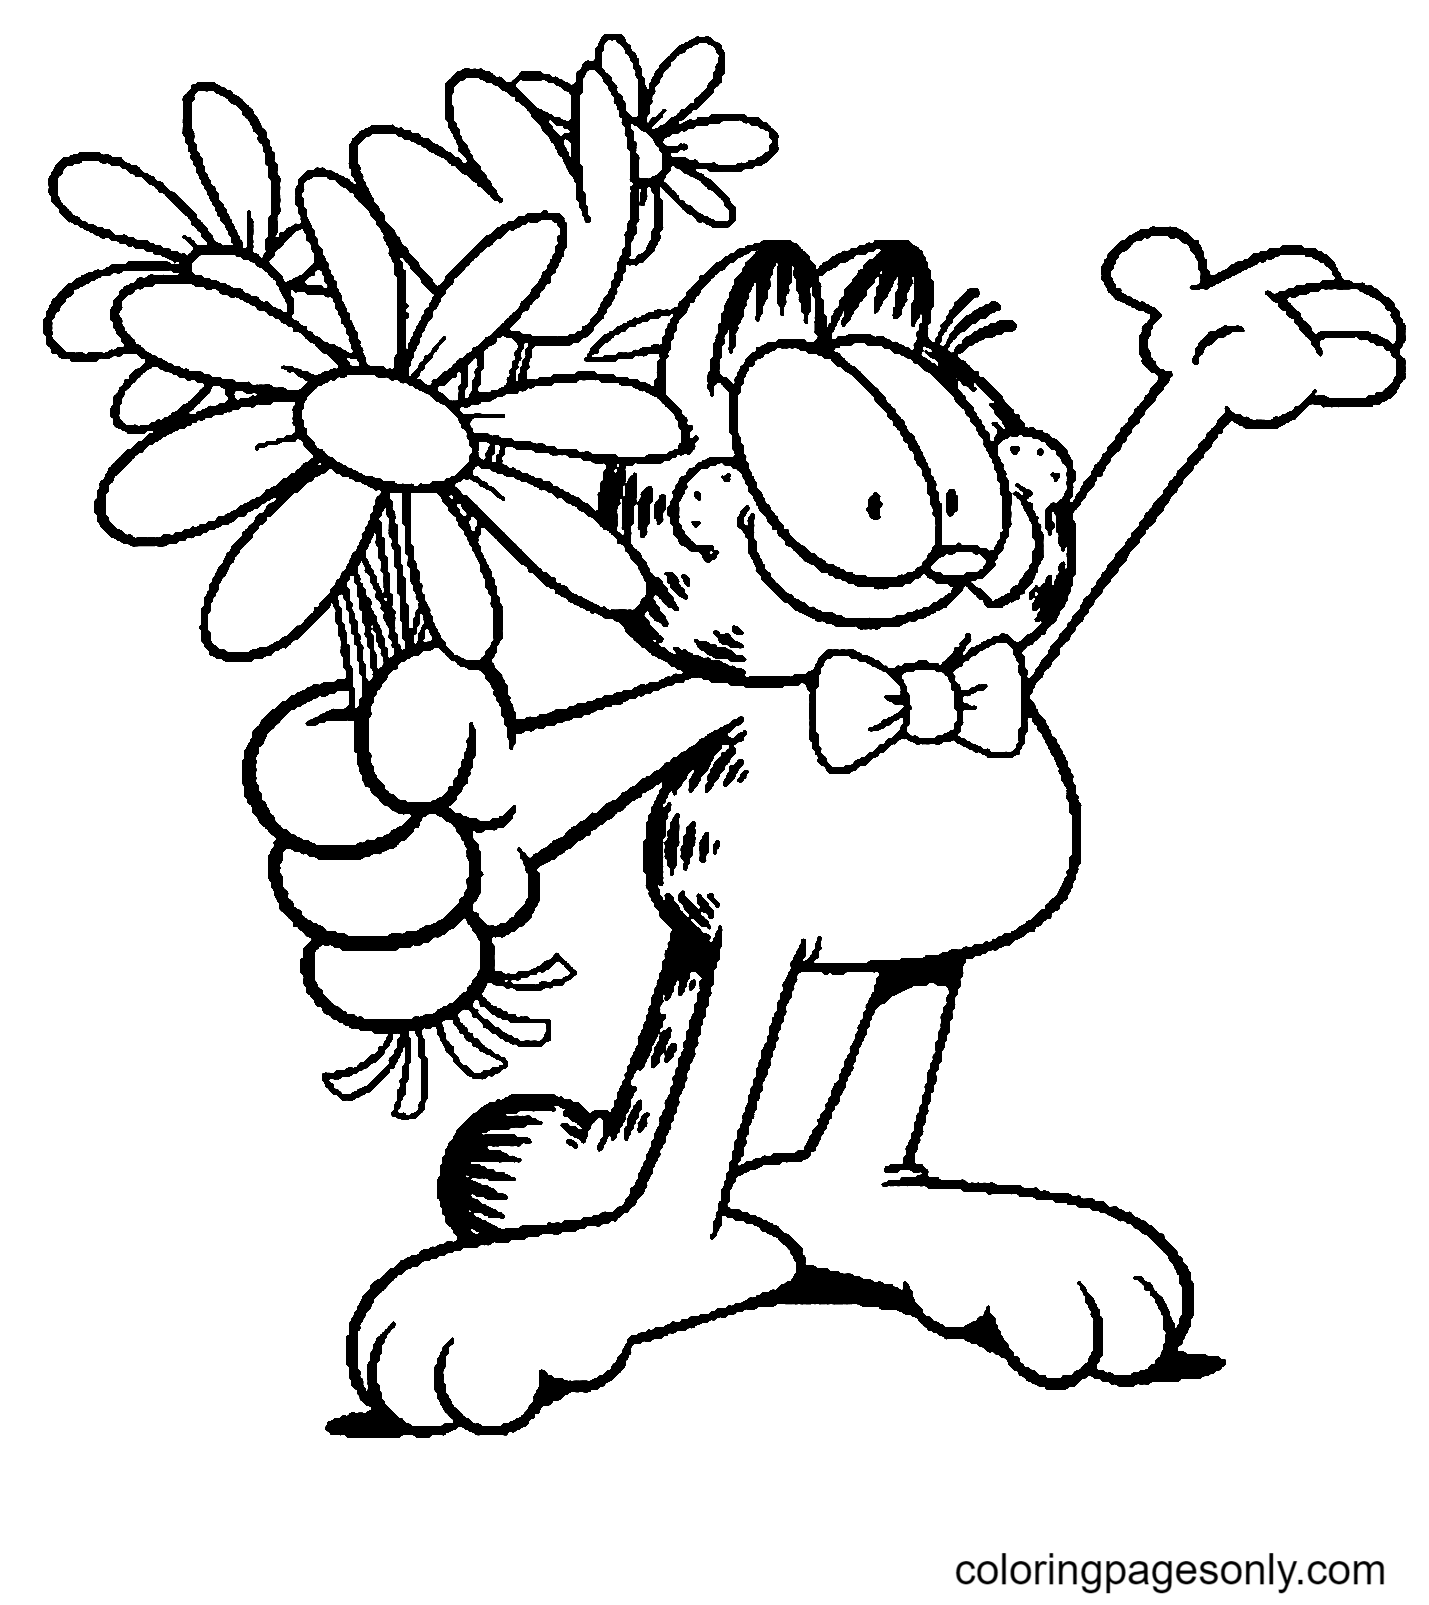 Garfield with Flowers Coloring Page